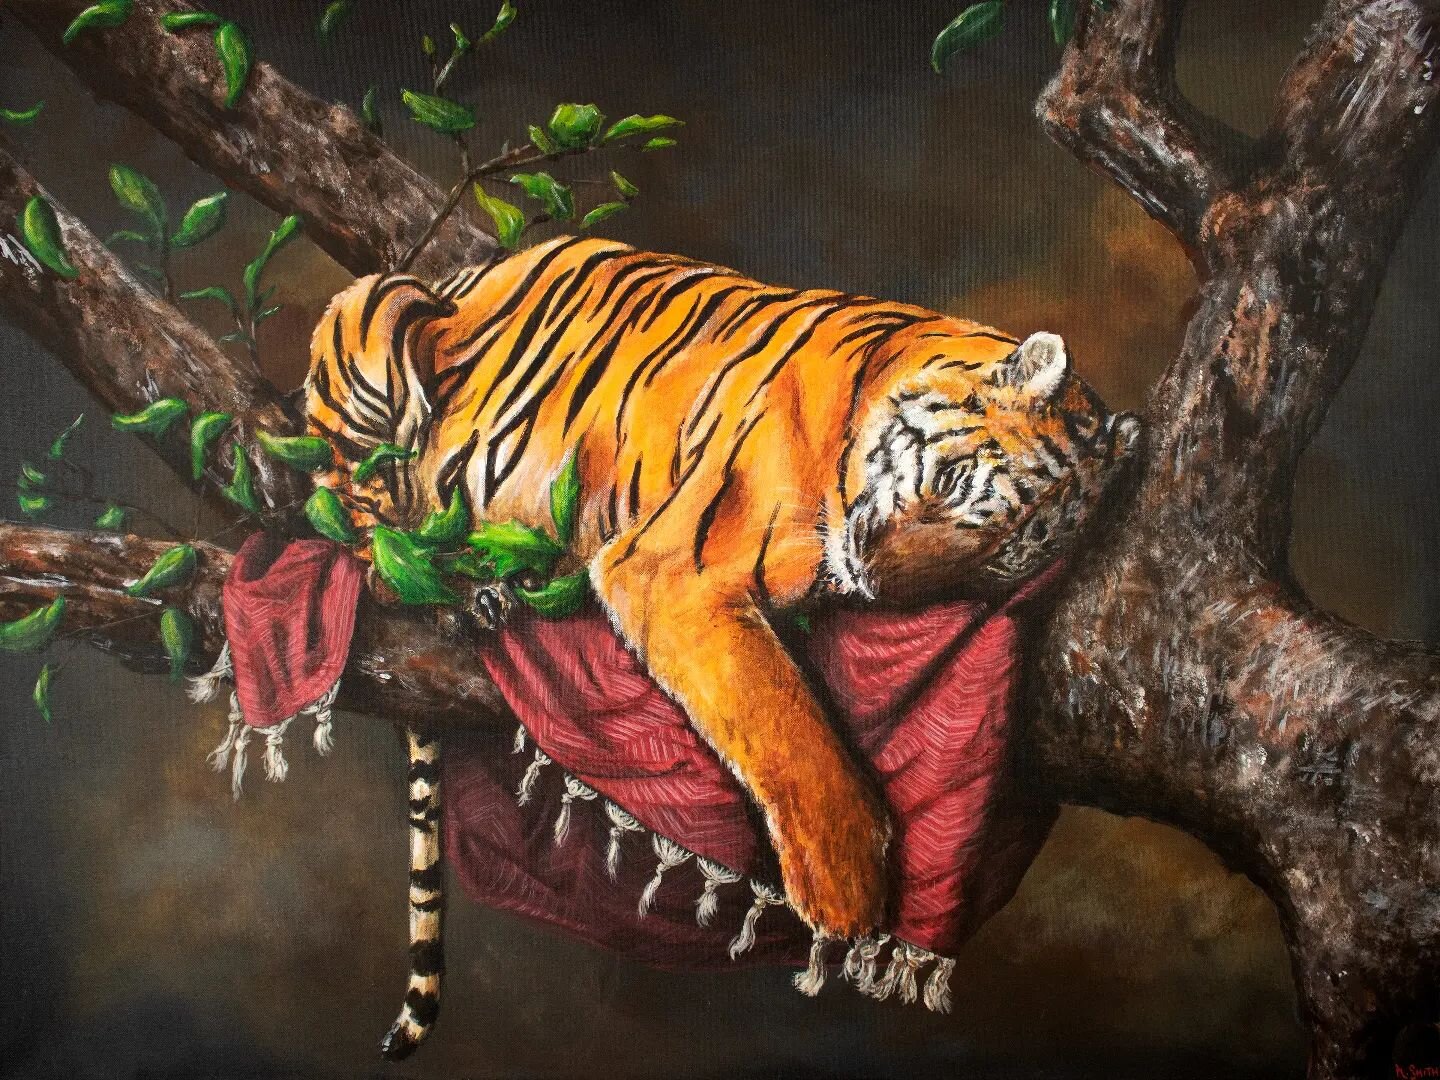 &quot;Cat Nap&quot;
48&quot; x 36&quot;
Acrylic on canvas
SOLD

The original has sold but prints are now avaialble on my website! Link in bio
_______

#tiger #bengaltiger #turkish #blanket #sleepingcat #naturelover #bigcats #acrylicpainting #artifthe